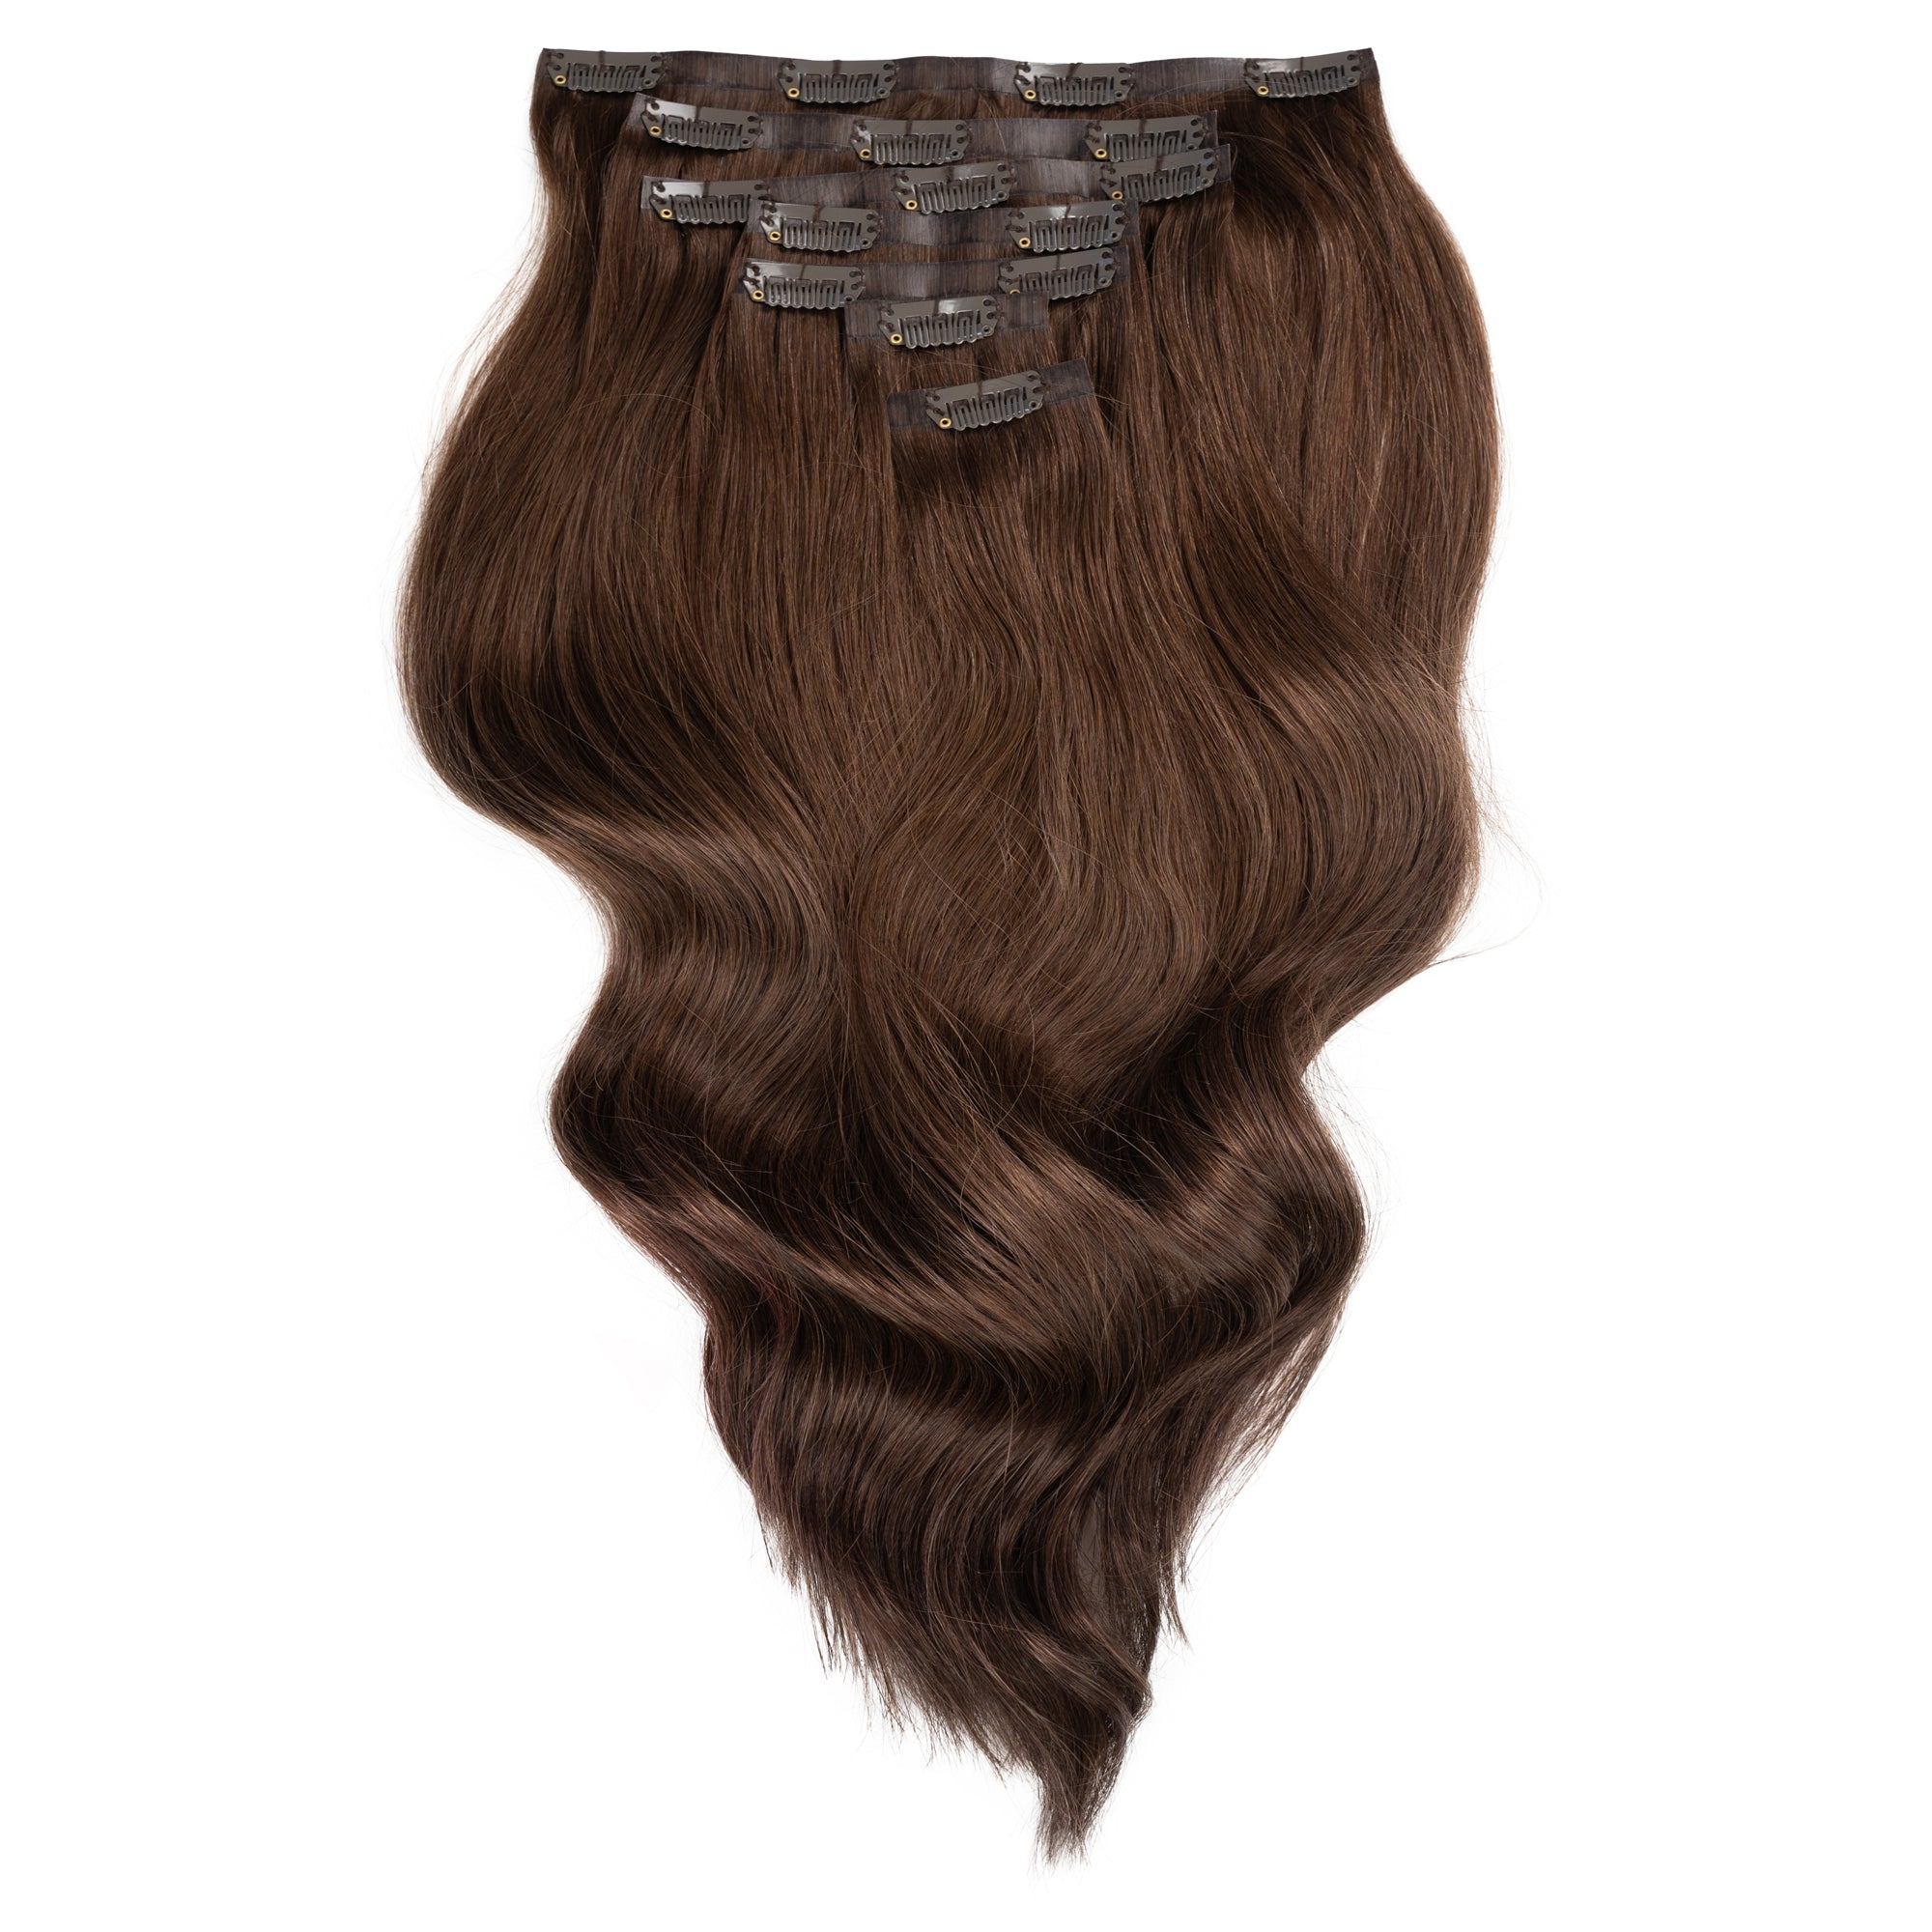 Duchess Elegant Clip-in Hair Extensions 14" Colour 6 Warm Brown - Maneology Hair Extensions